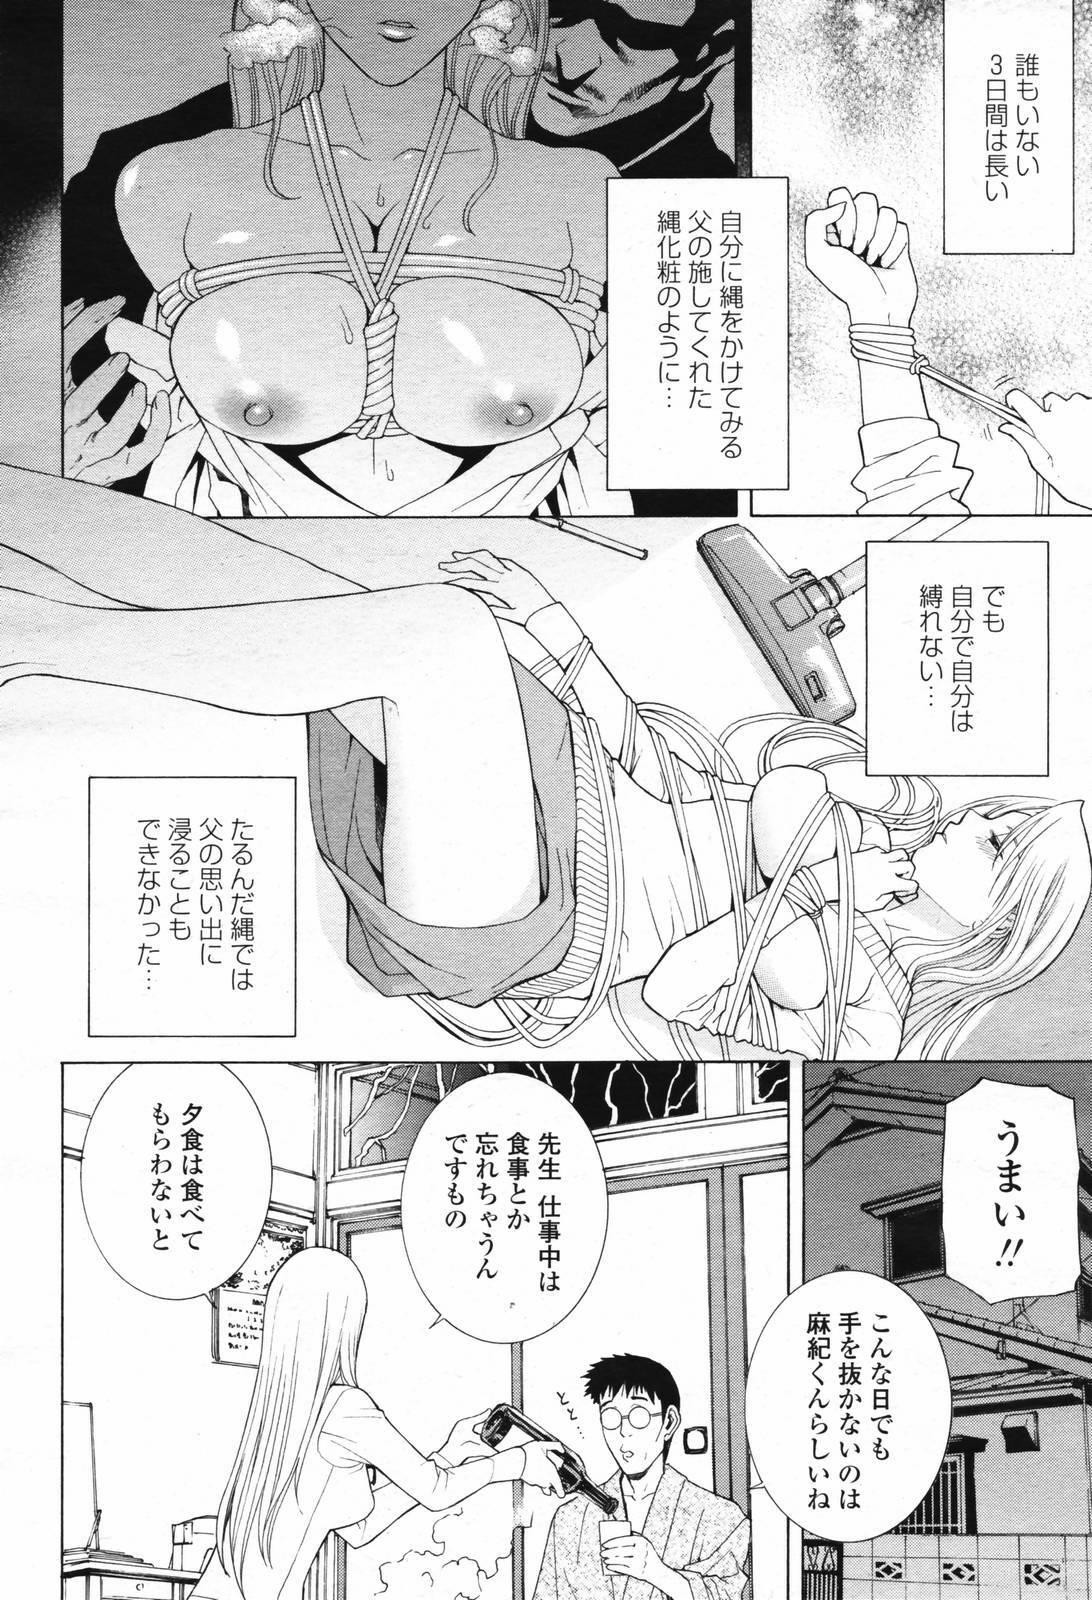 COMIC Momohime 2007-02 page 36 full